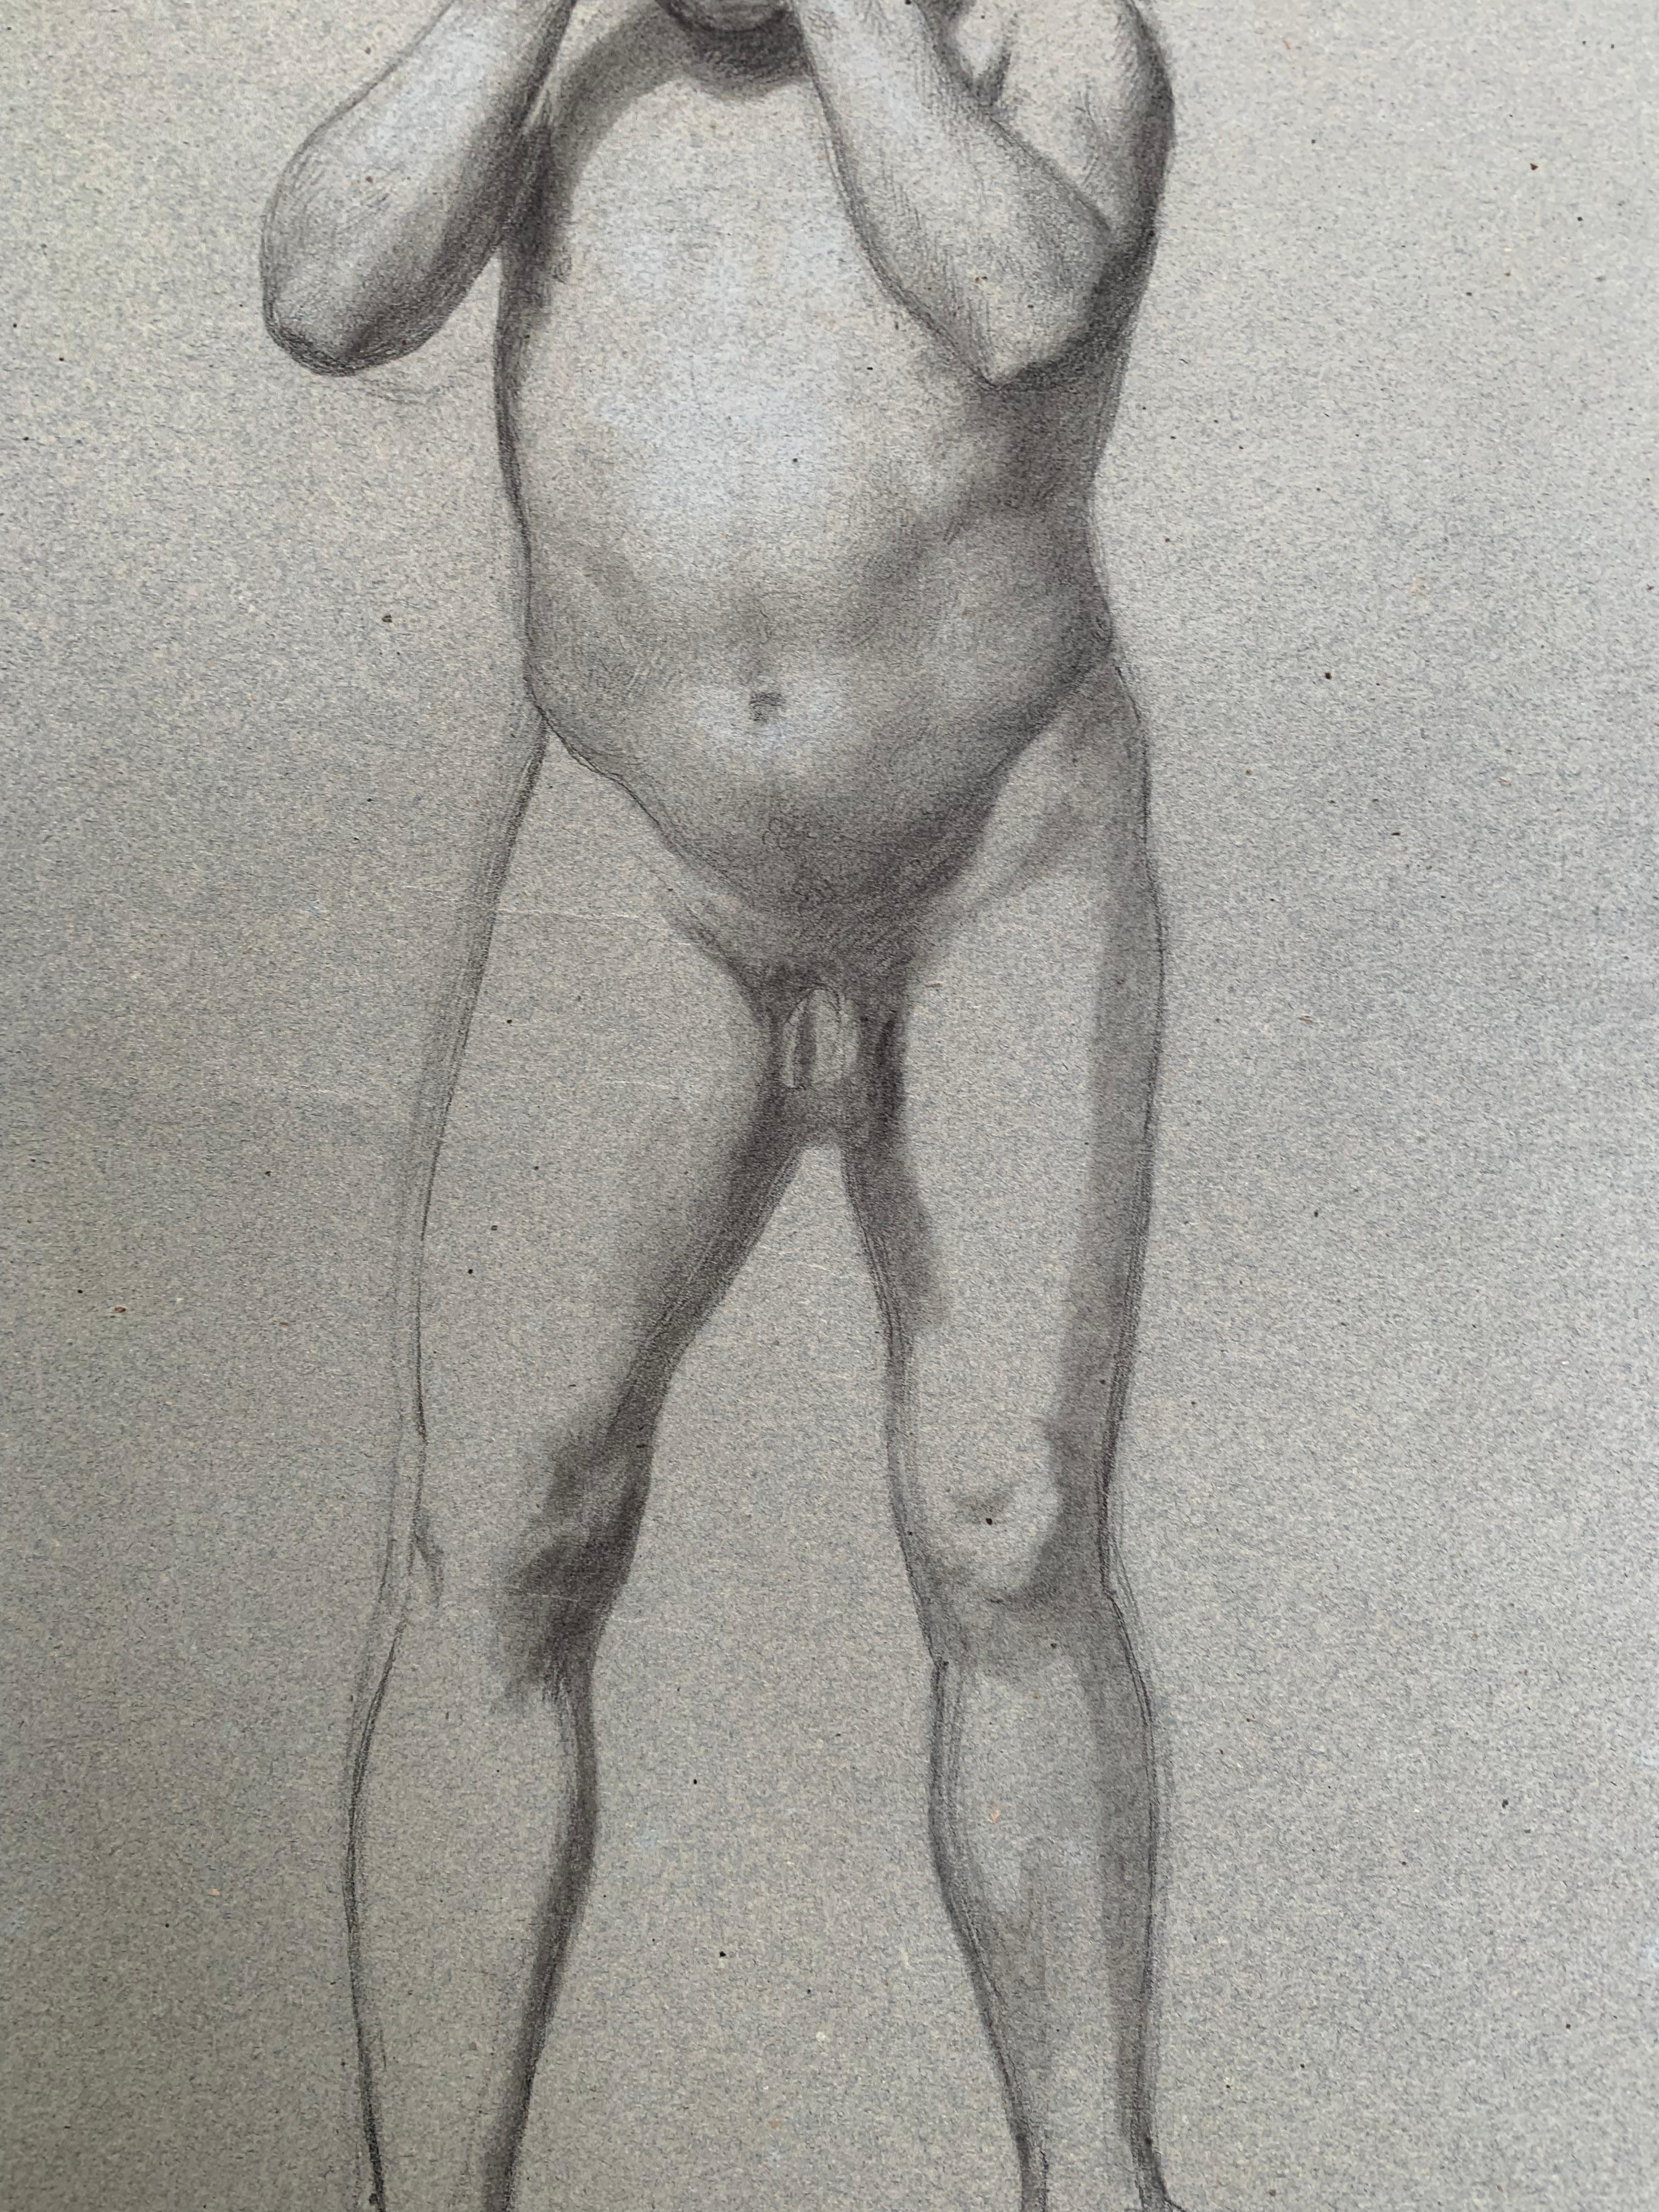 Preparatory anatomical study for the figure of a man with hands on his face. For Sale 4